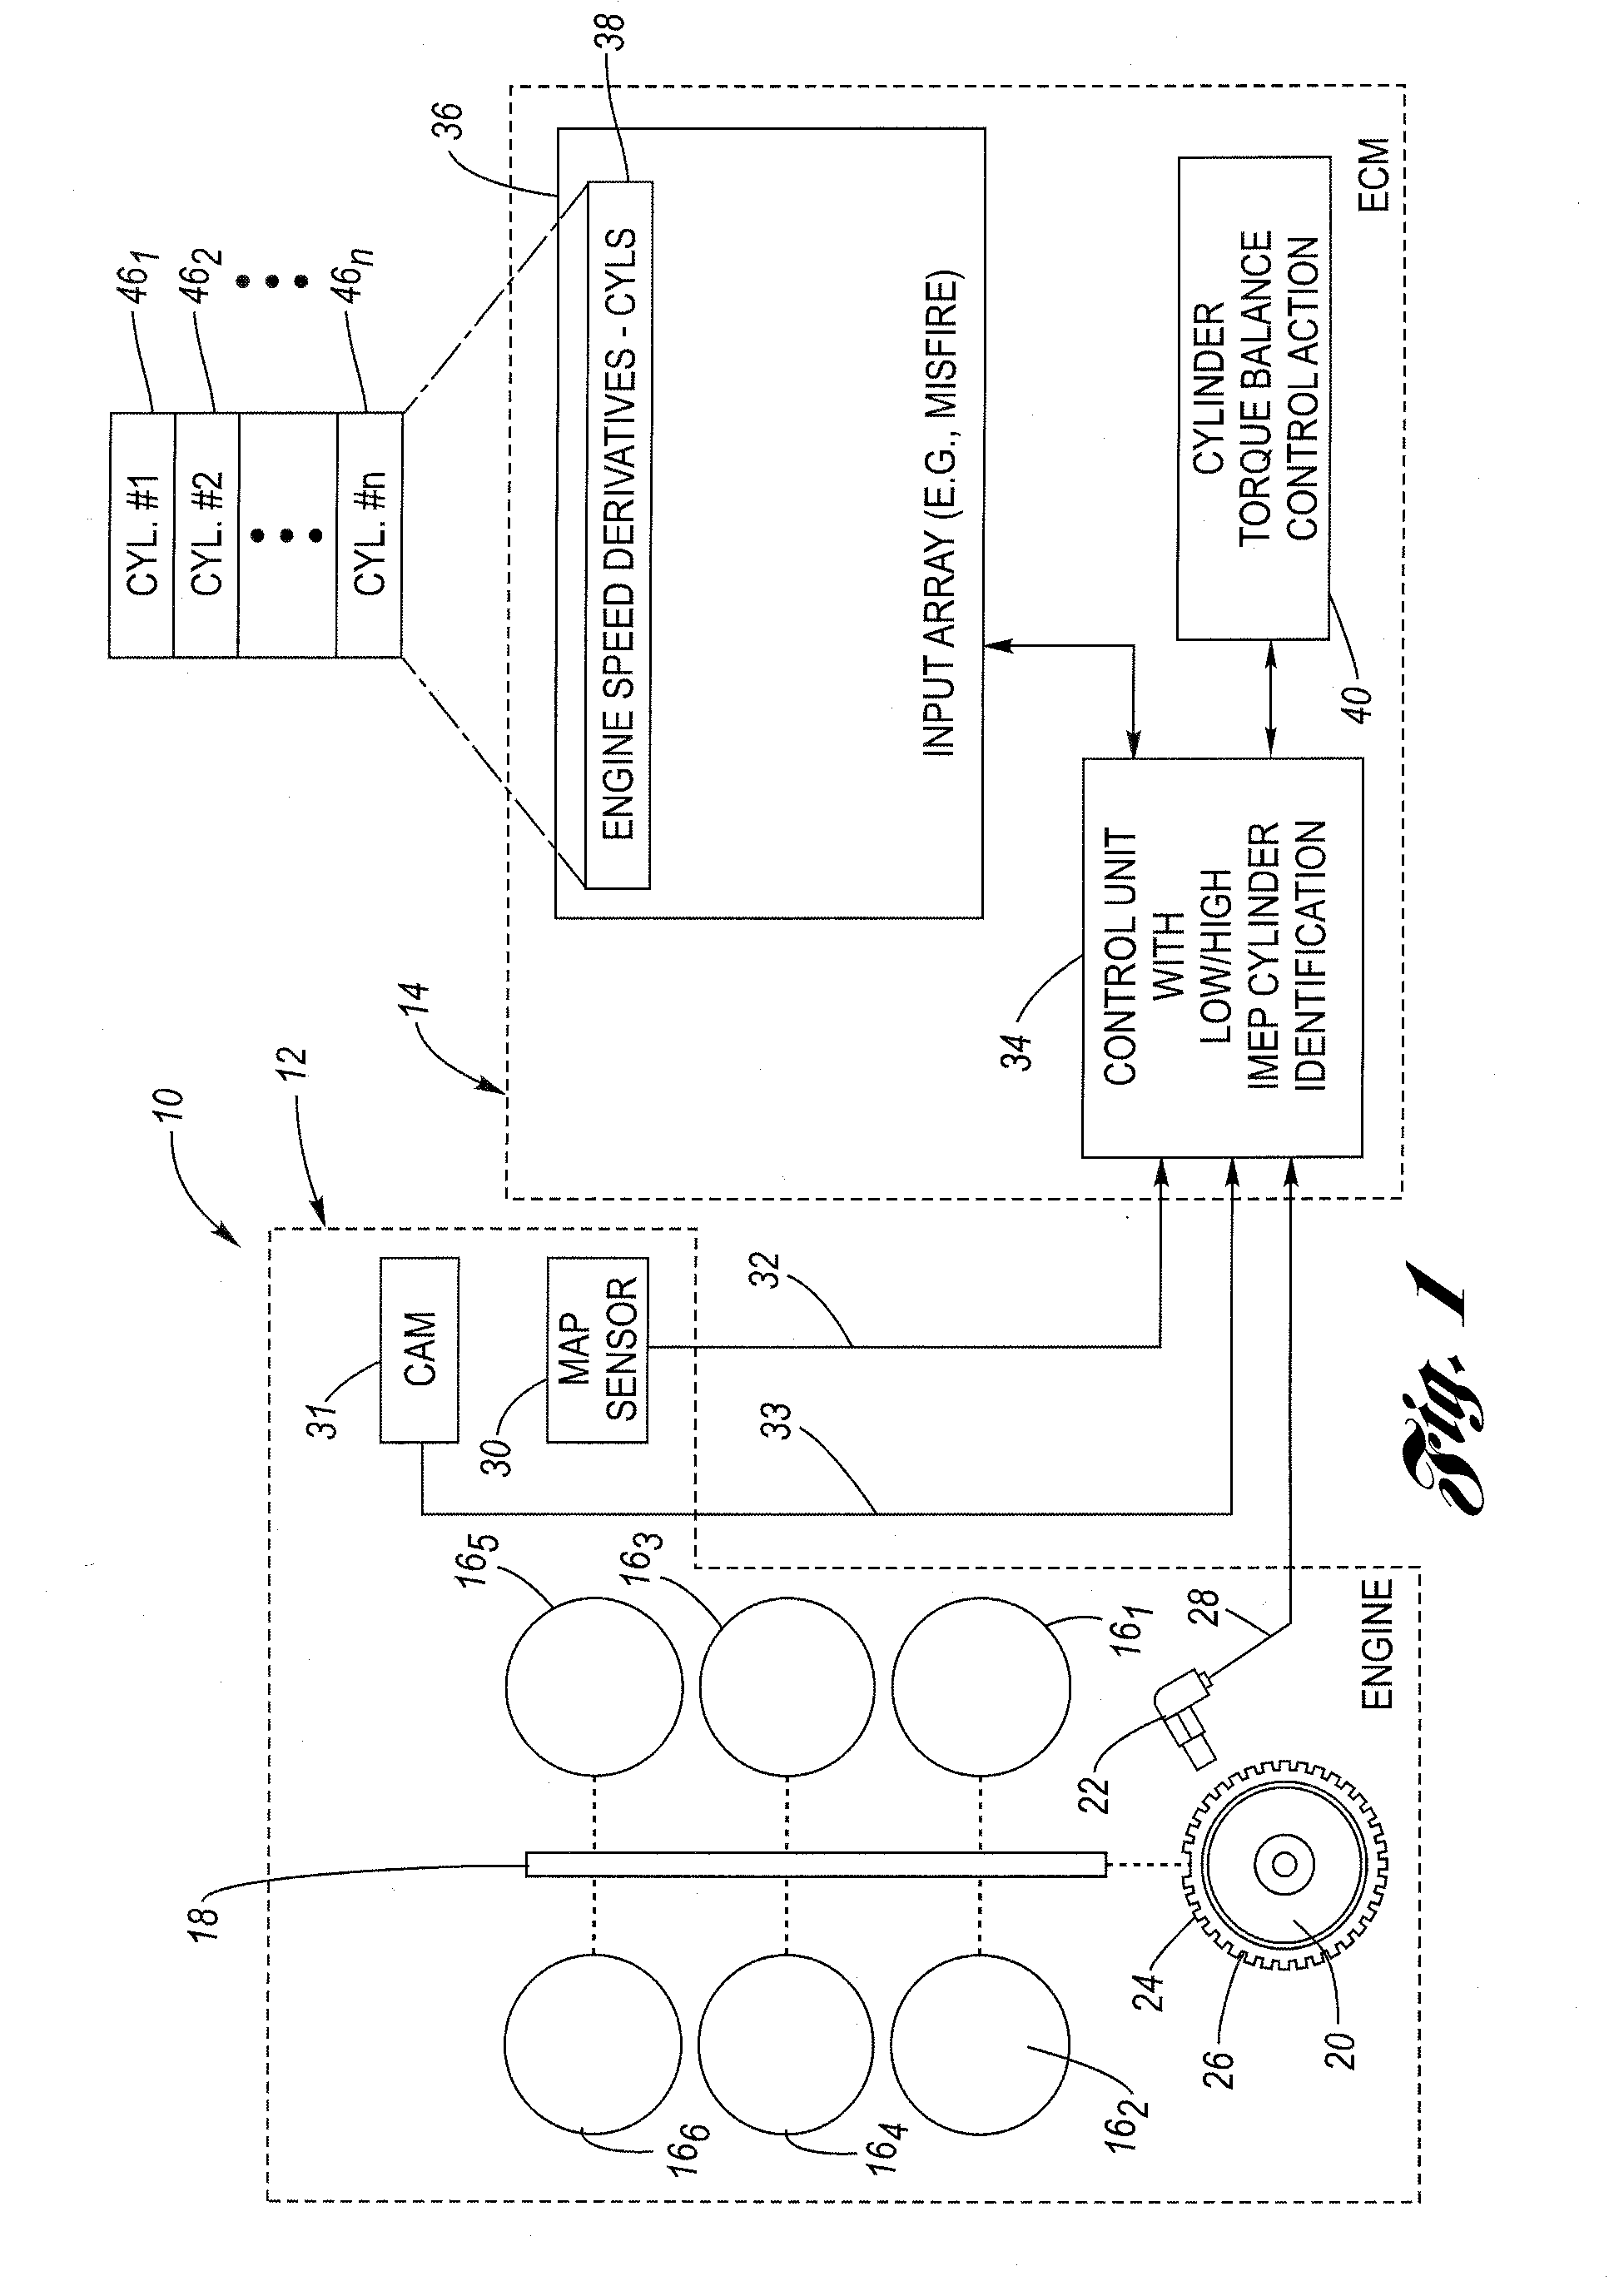 Method for low and high imep cylinder identification for cylinder balancing